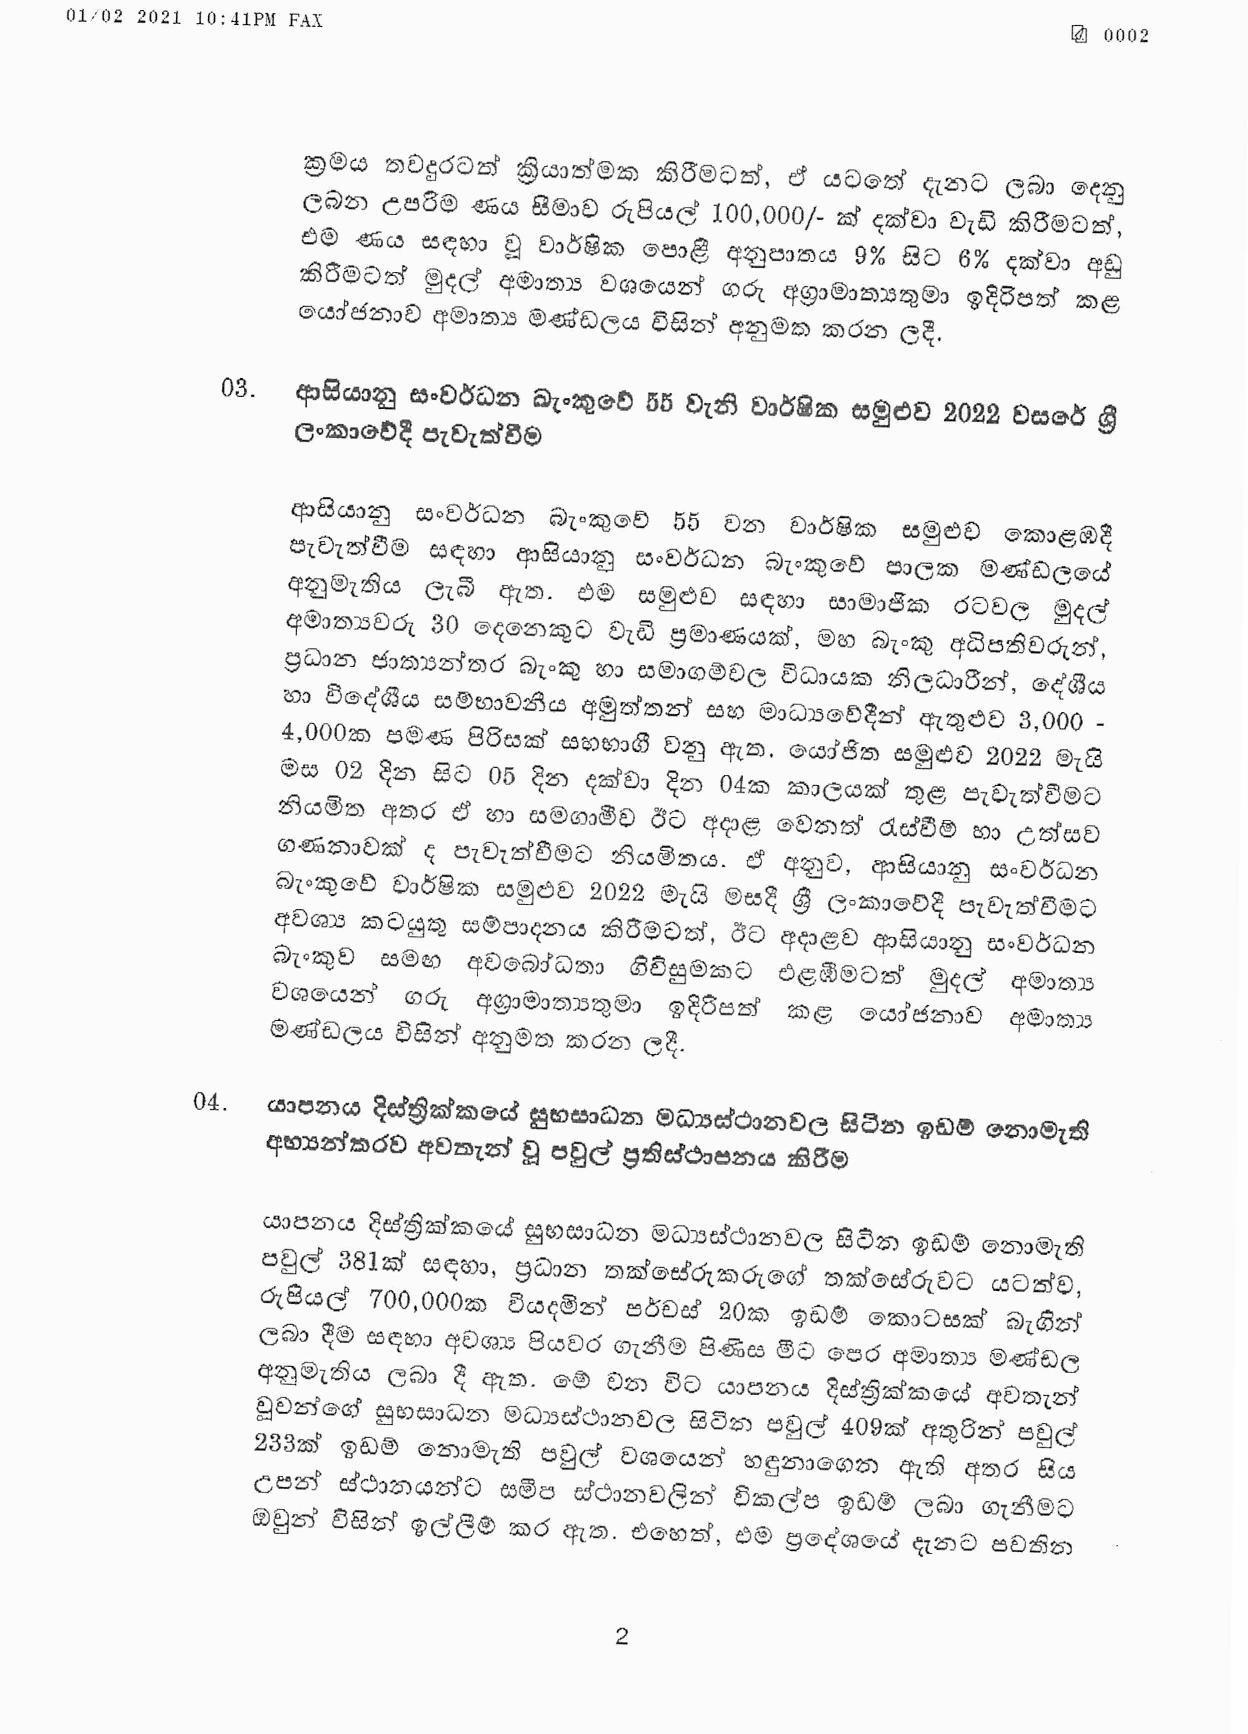 Cabinet Decision on 01.02.2021 page 002